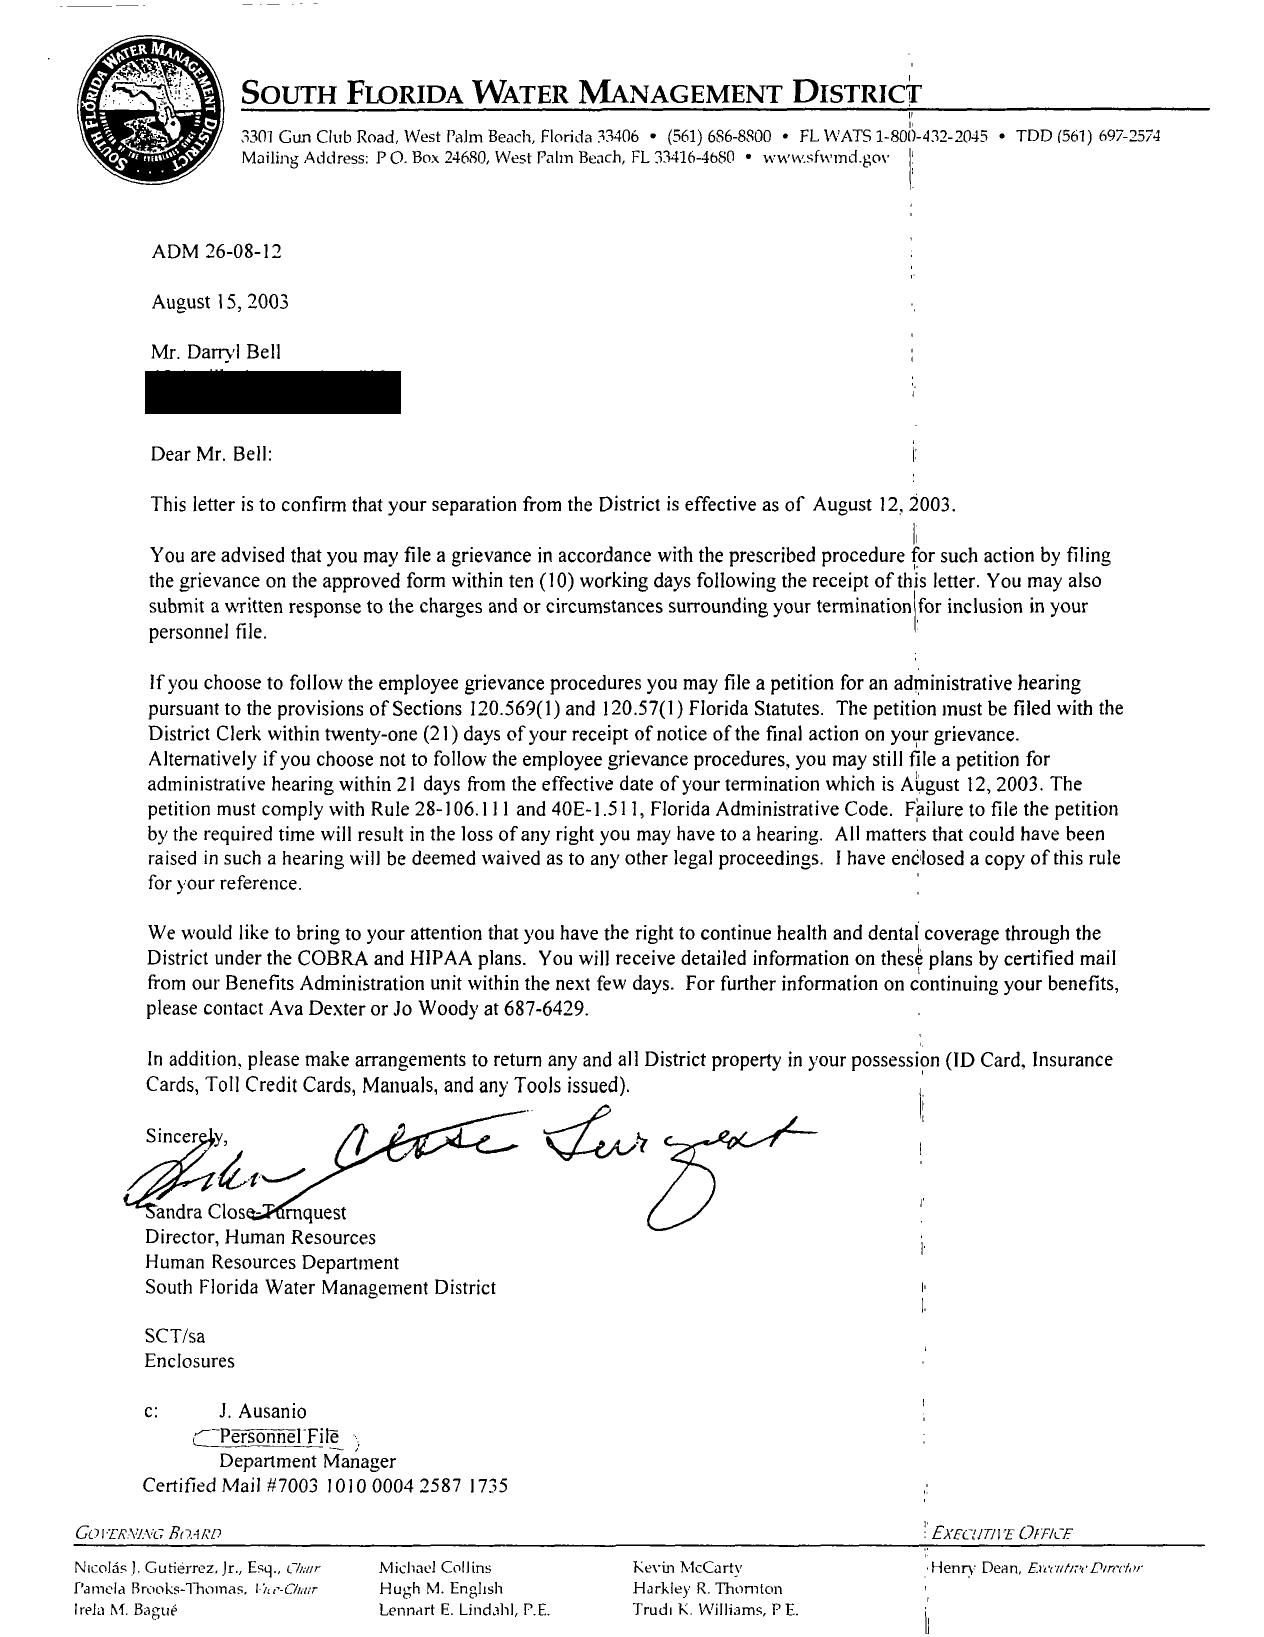 Troy Bell water termination letter